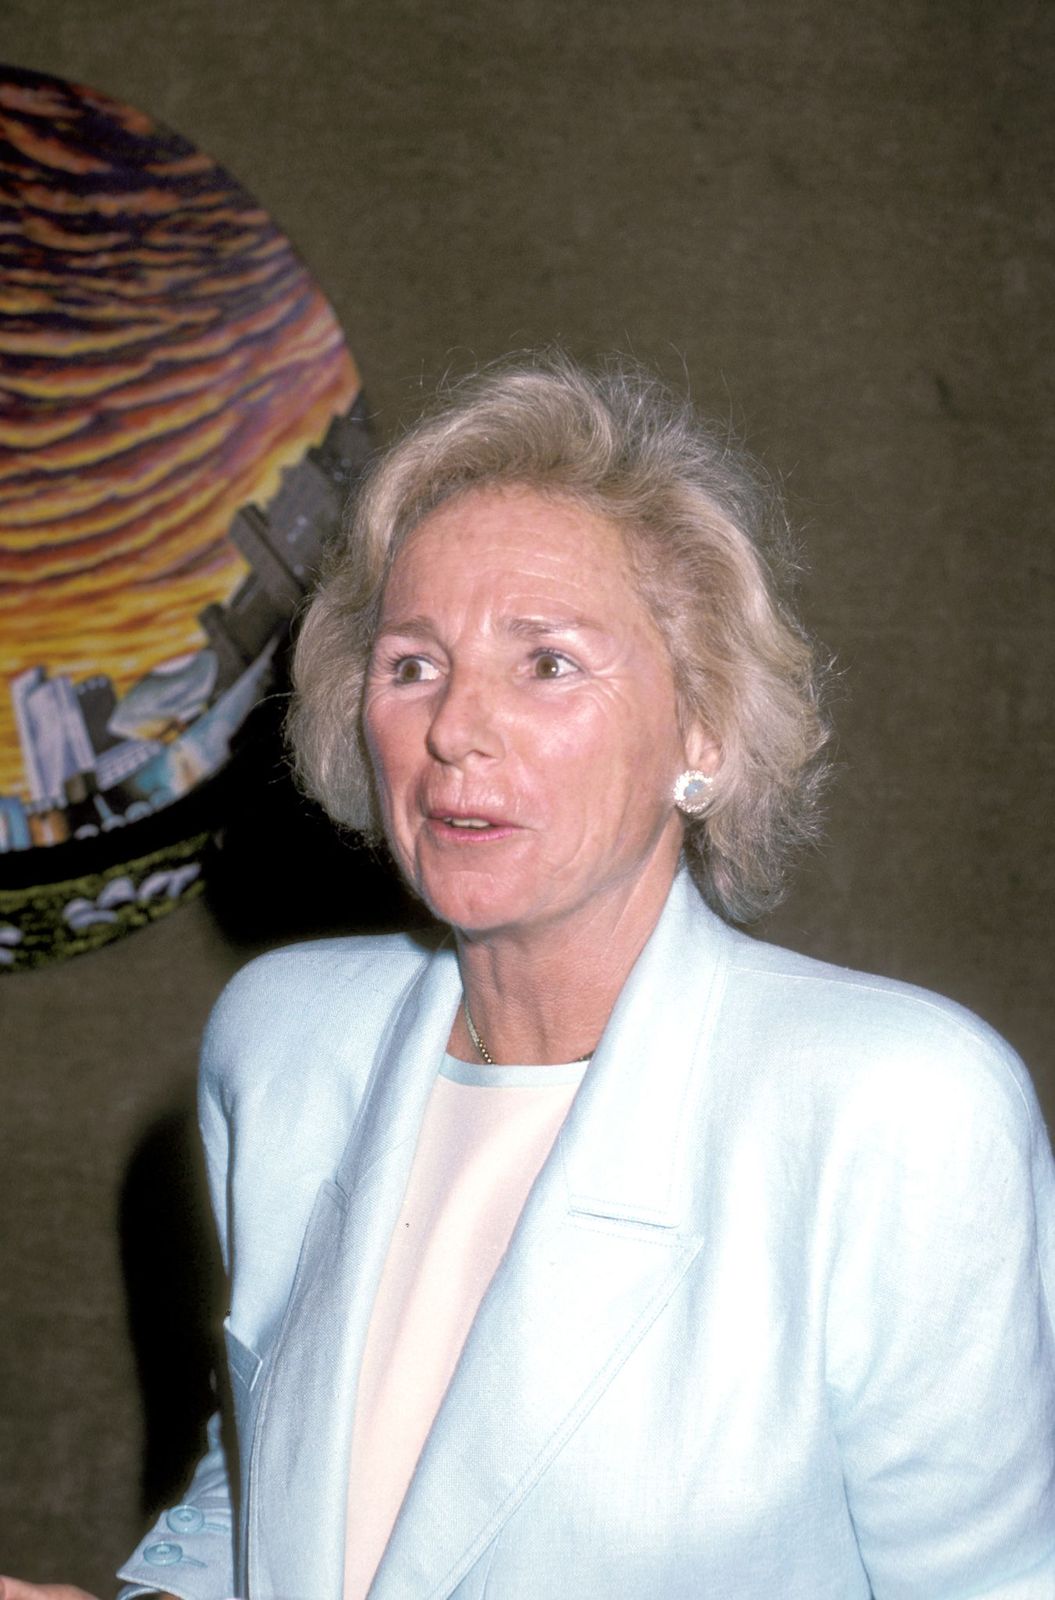 Ethel Kennedy during the First Public Exhibition and Benefit Auction of Art by Henry Fonda in New York | Photo: Ron Galella/Ron Galella Collection/Getty Images